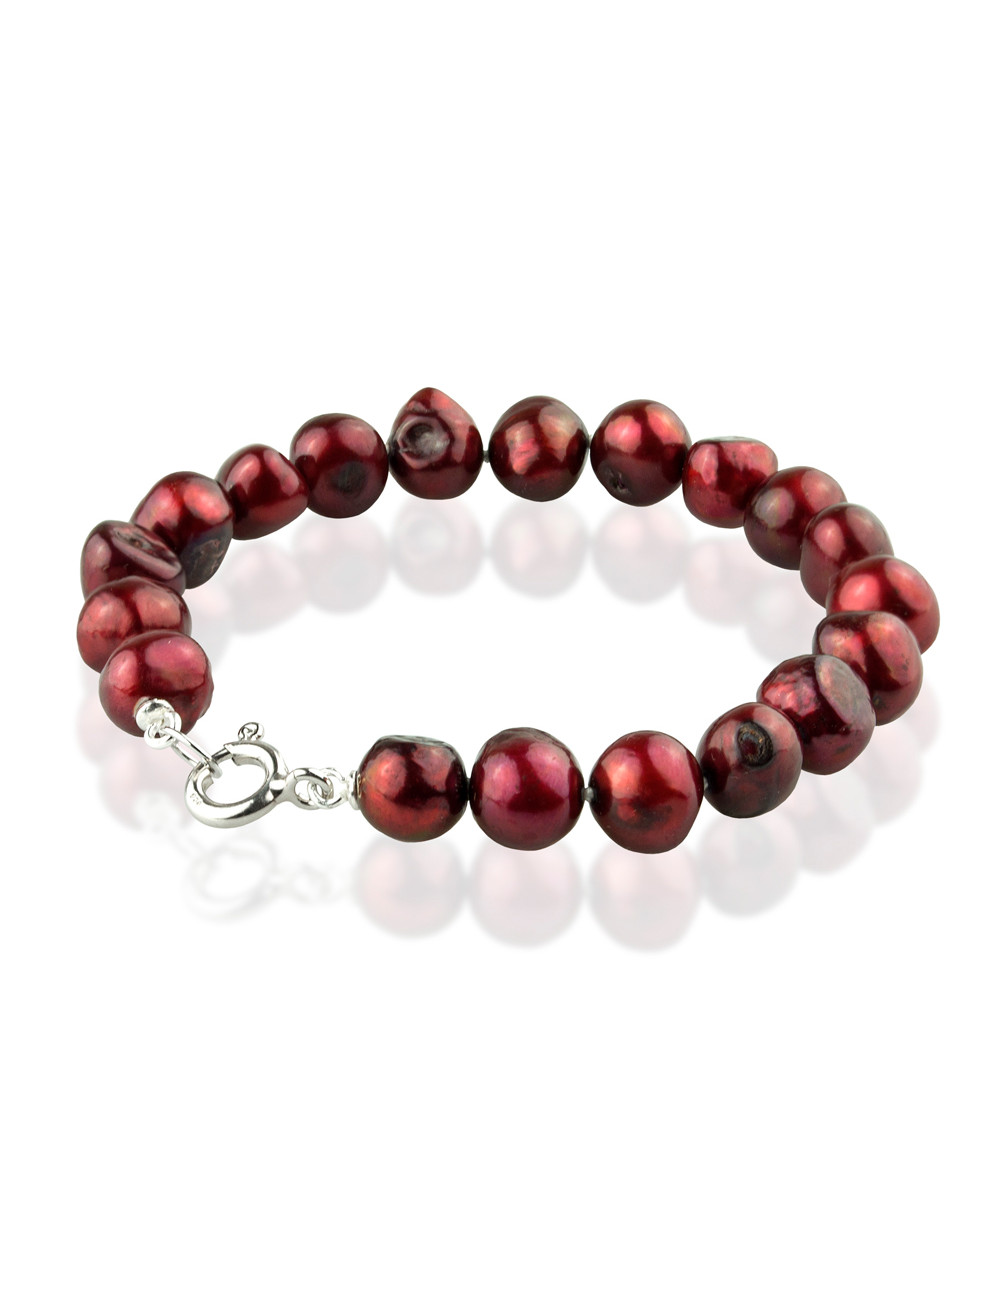 Bracelet of maroon pearls with irregular shapes and high shine BrB7585S